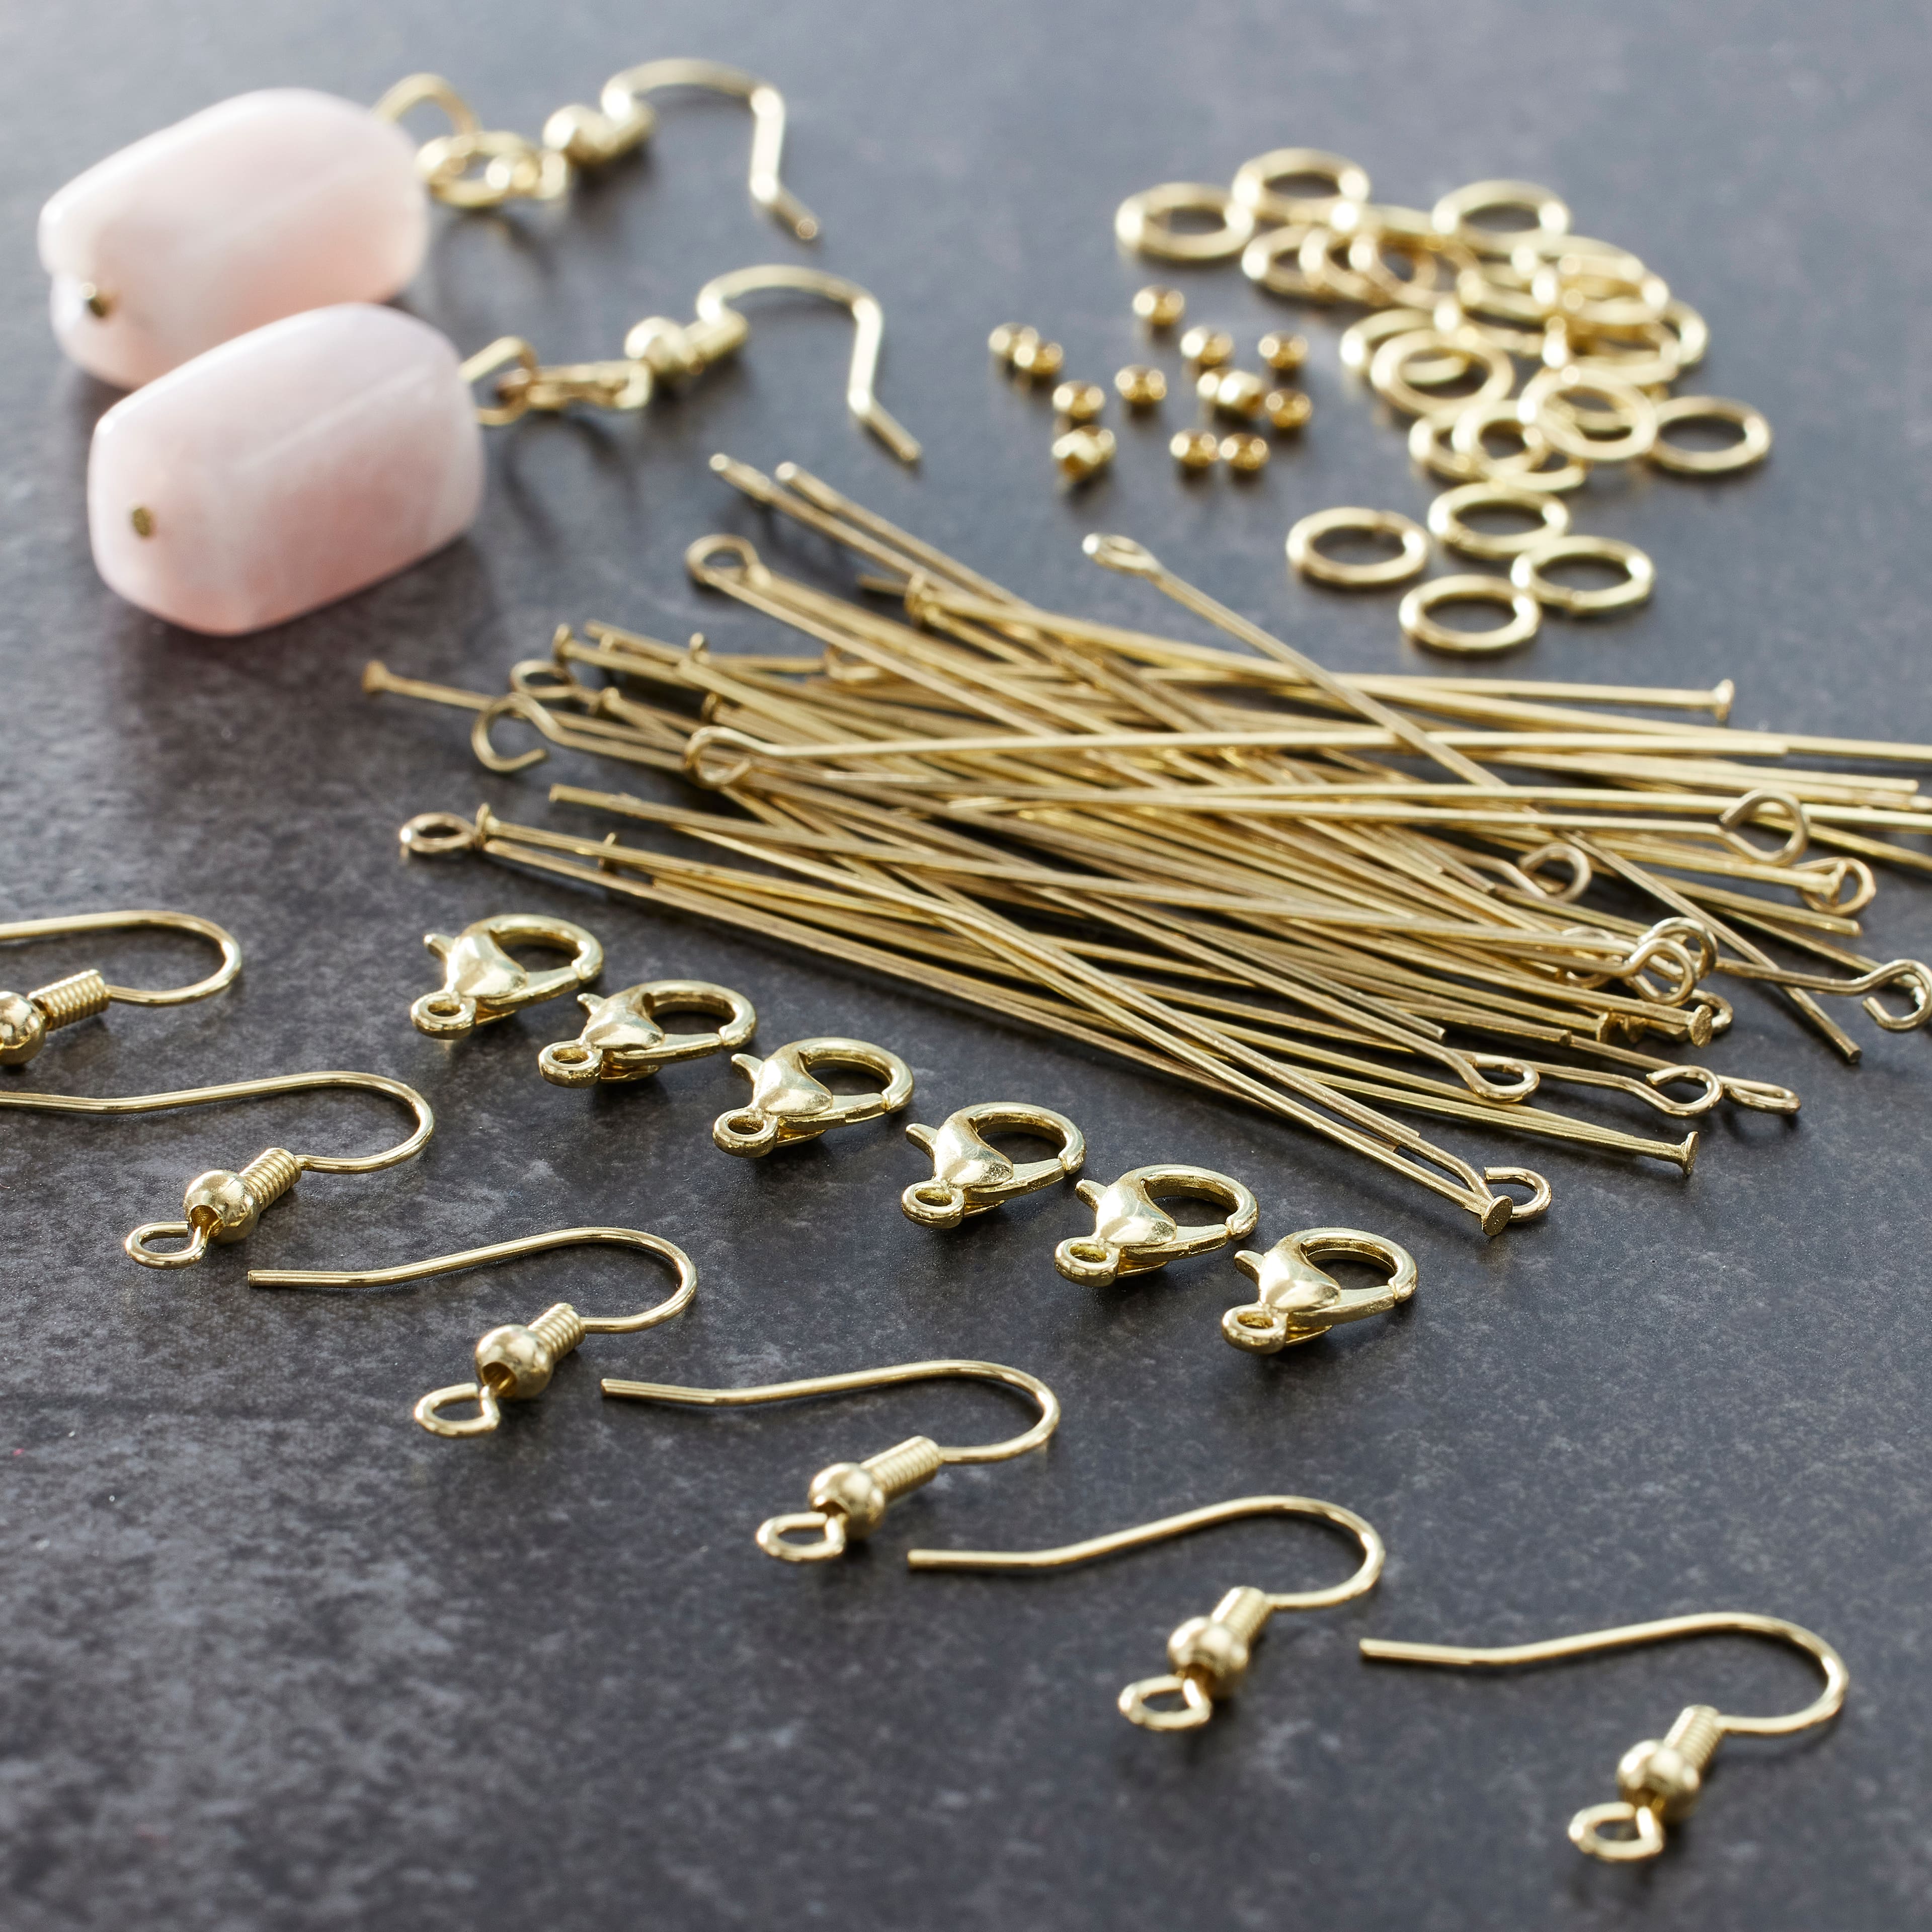 hildie & Jo 779pc Gold Jewelry Findings Kit - Jewelry Clasps & Closures - Beads & Jewelry Making